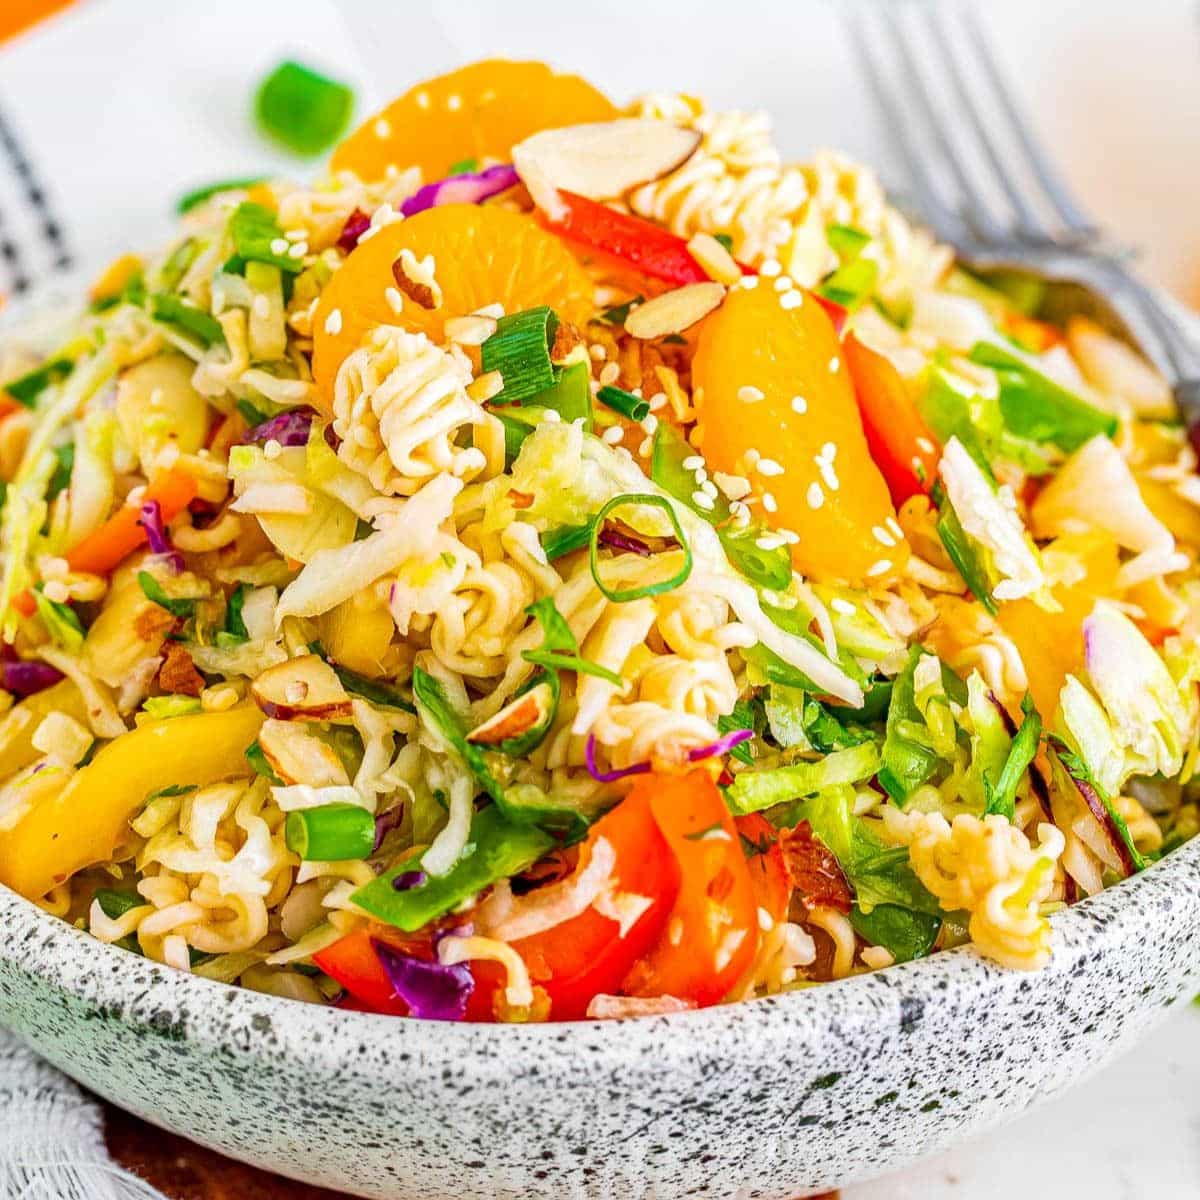 Ramen noodle salad with oranges and veggies in a pretty serving bowl.